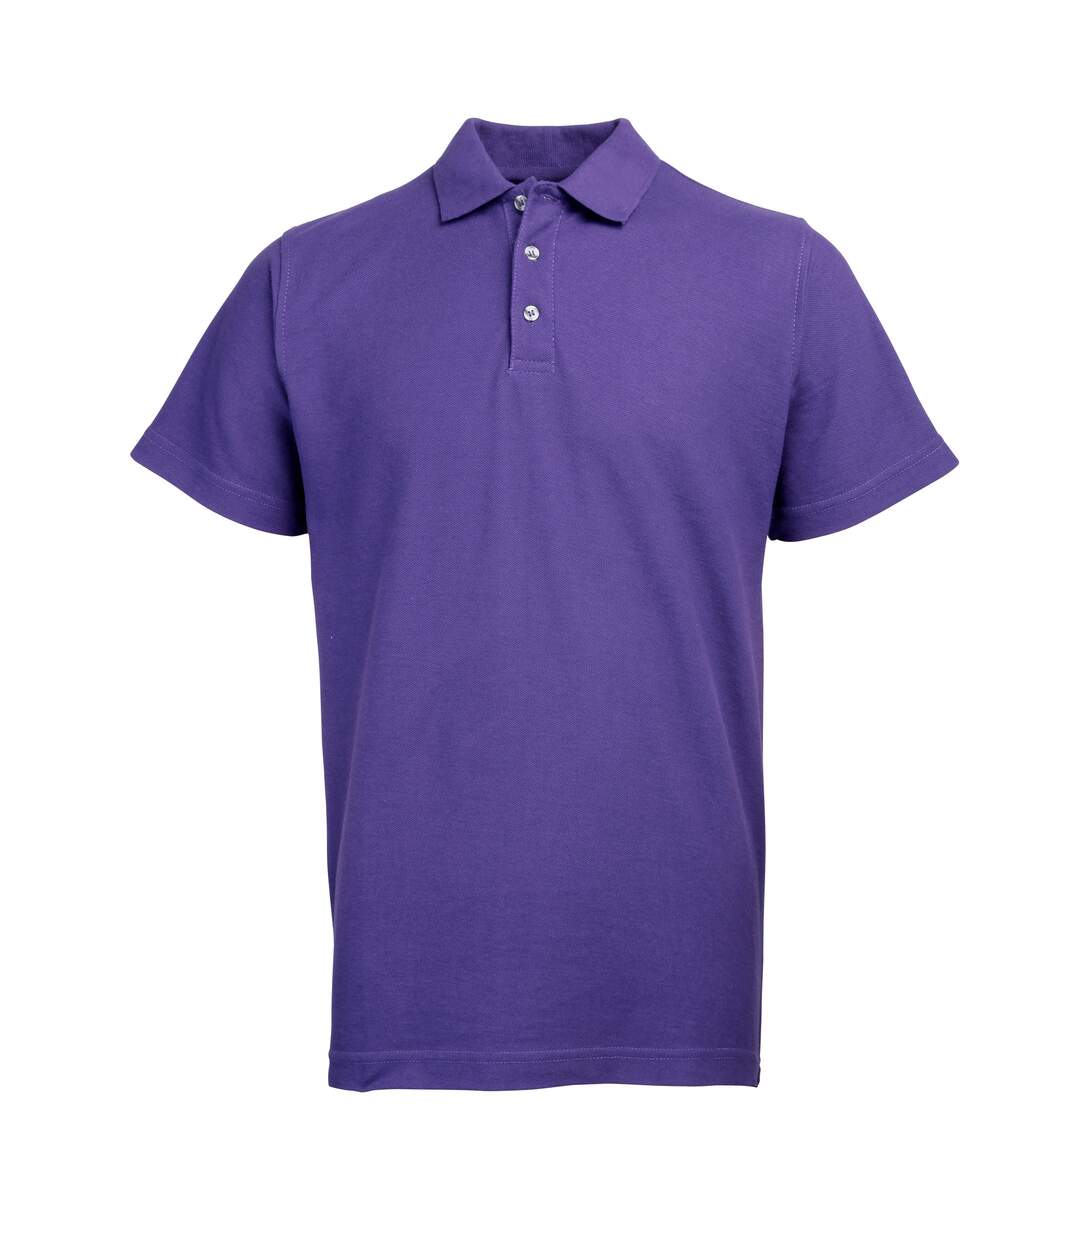 RTY Workwear Mens Pique Knit Heavyweight Polo Shirt (S-10XL) / Extra Large Sizes (Purple)